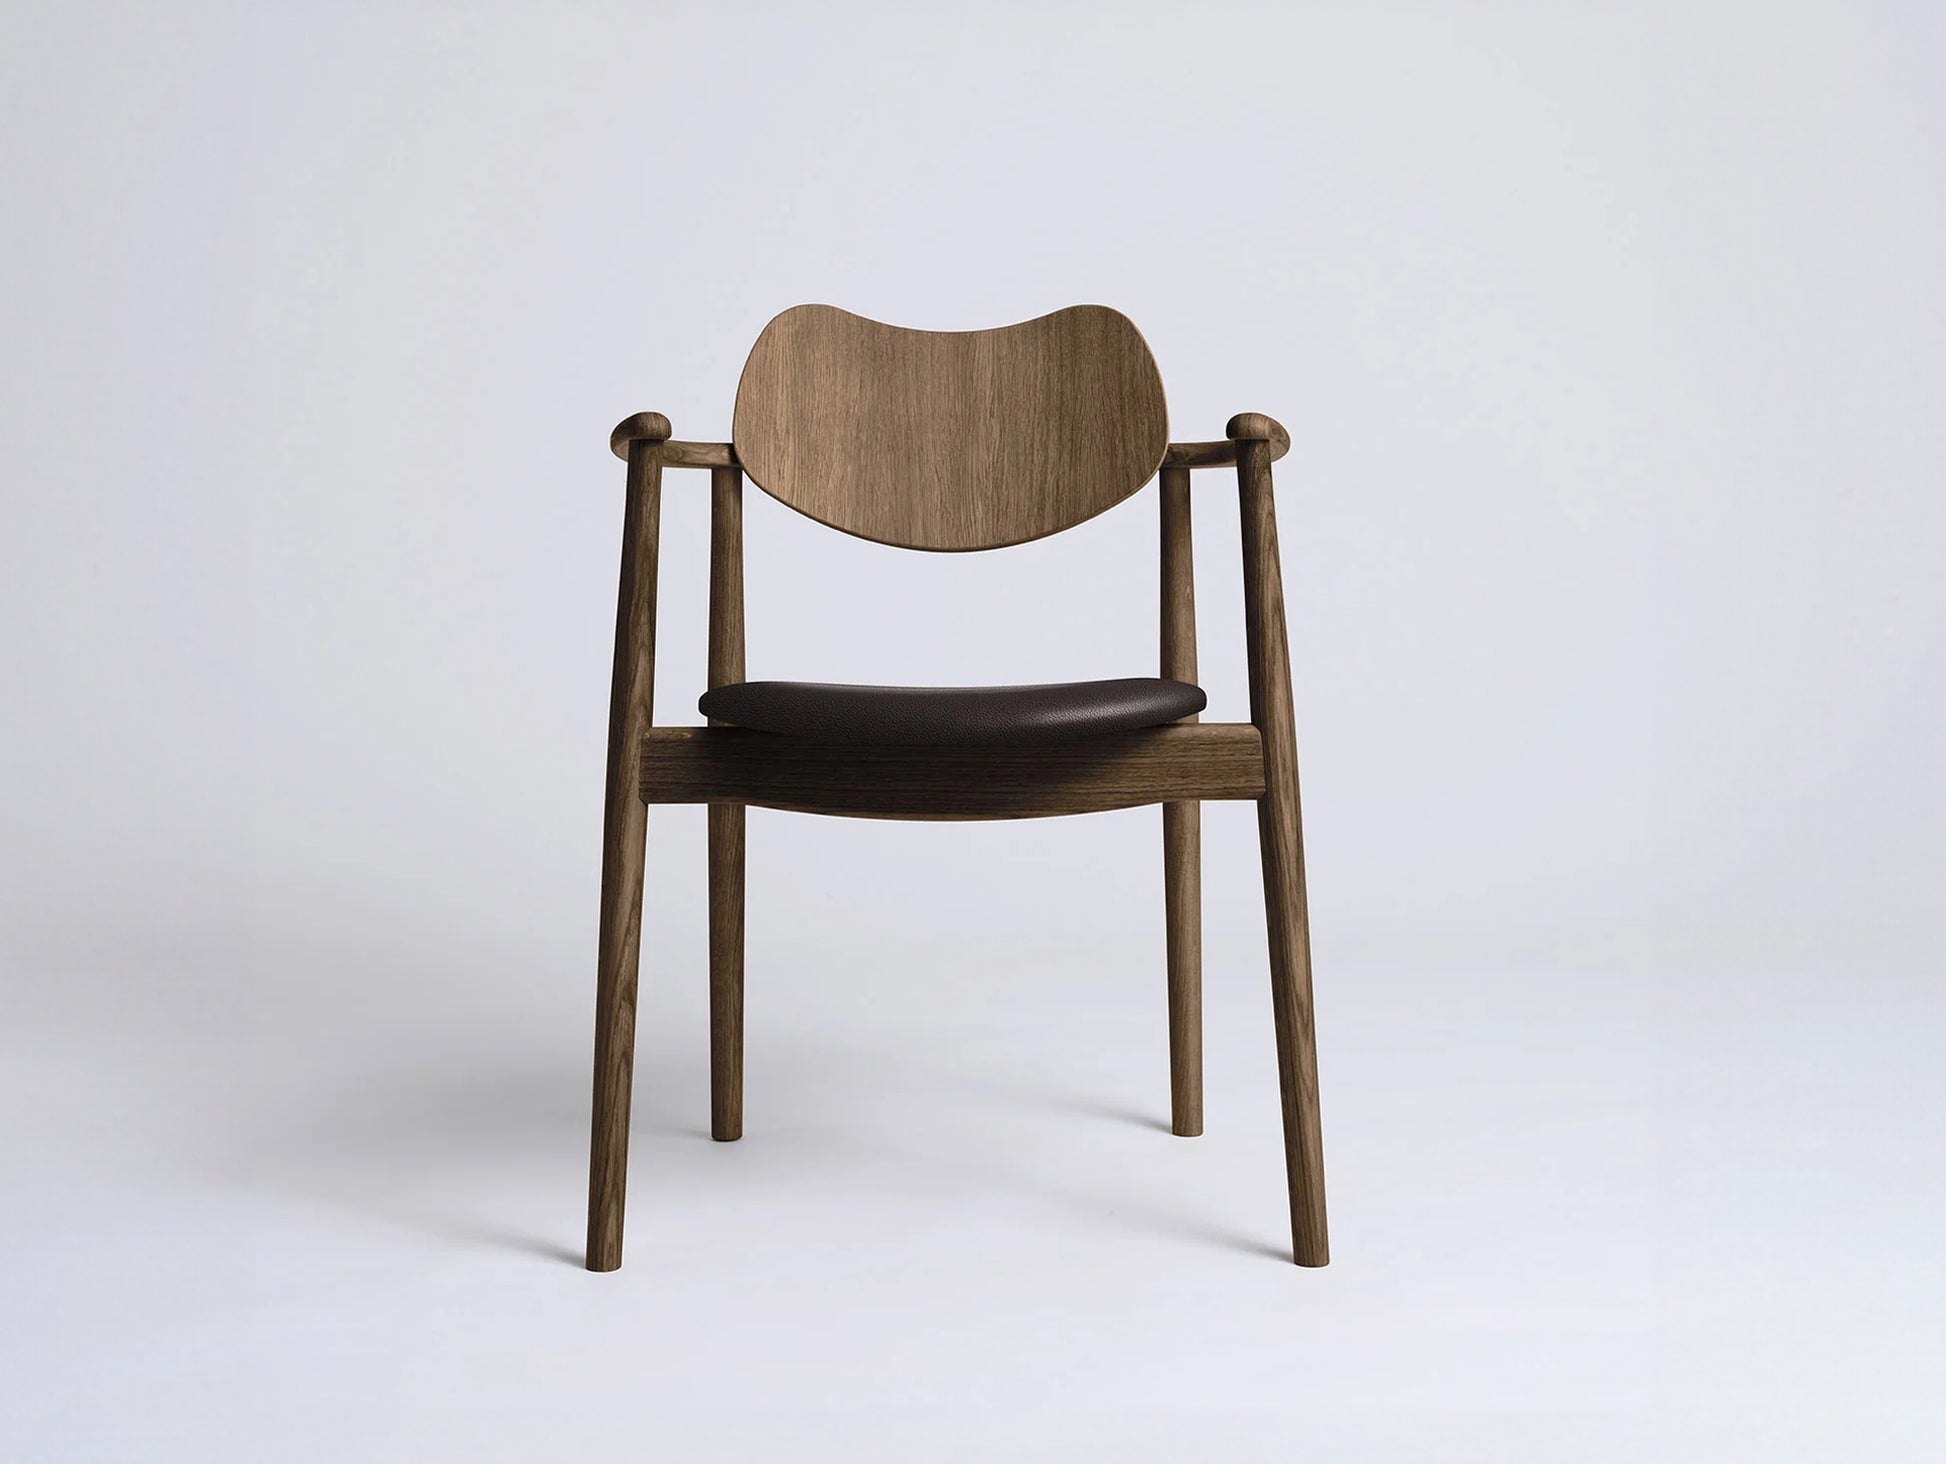 Regatta Chair Seat Upholstered by Ro Collection - Smoked Oak / Standard Sierra Dark Brown Leather